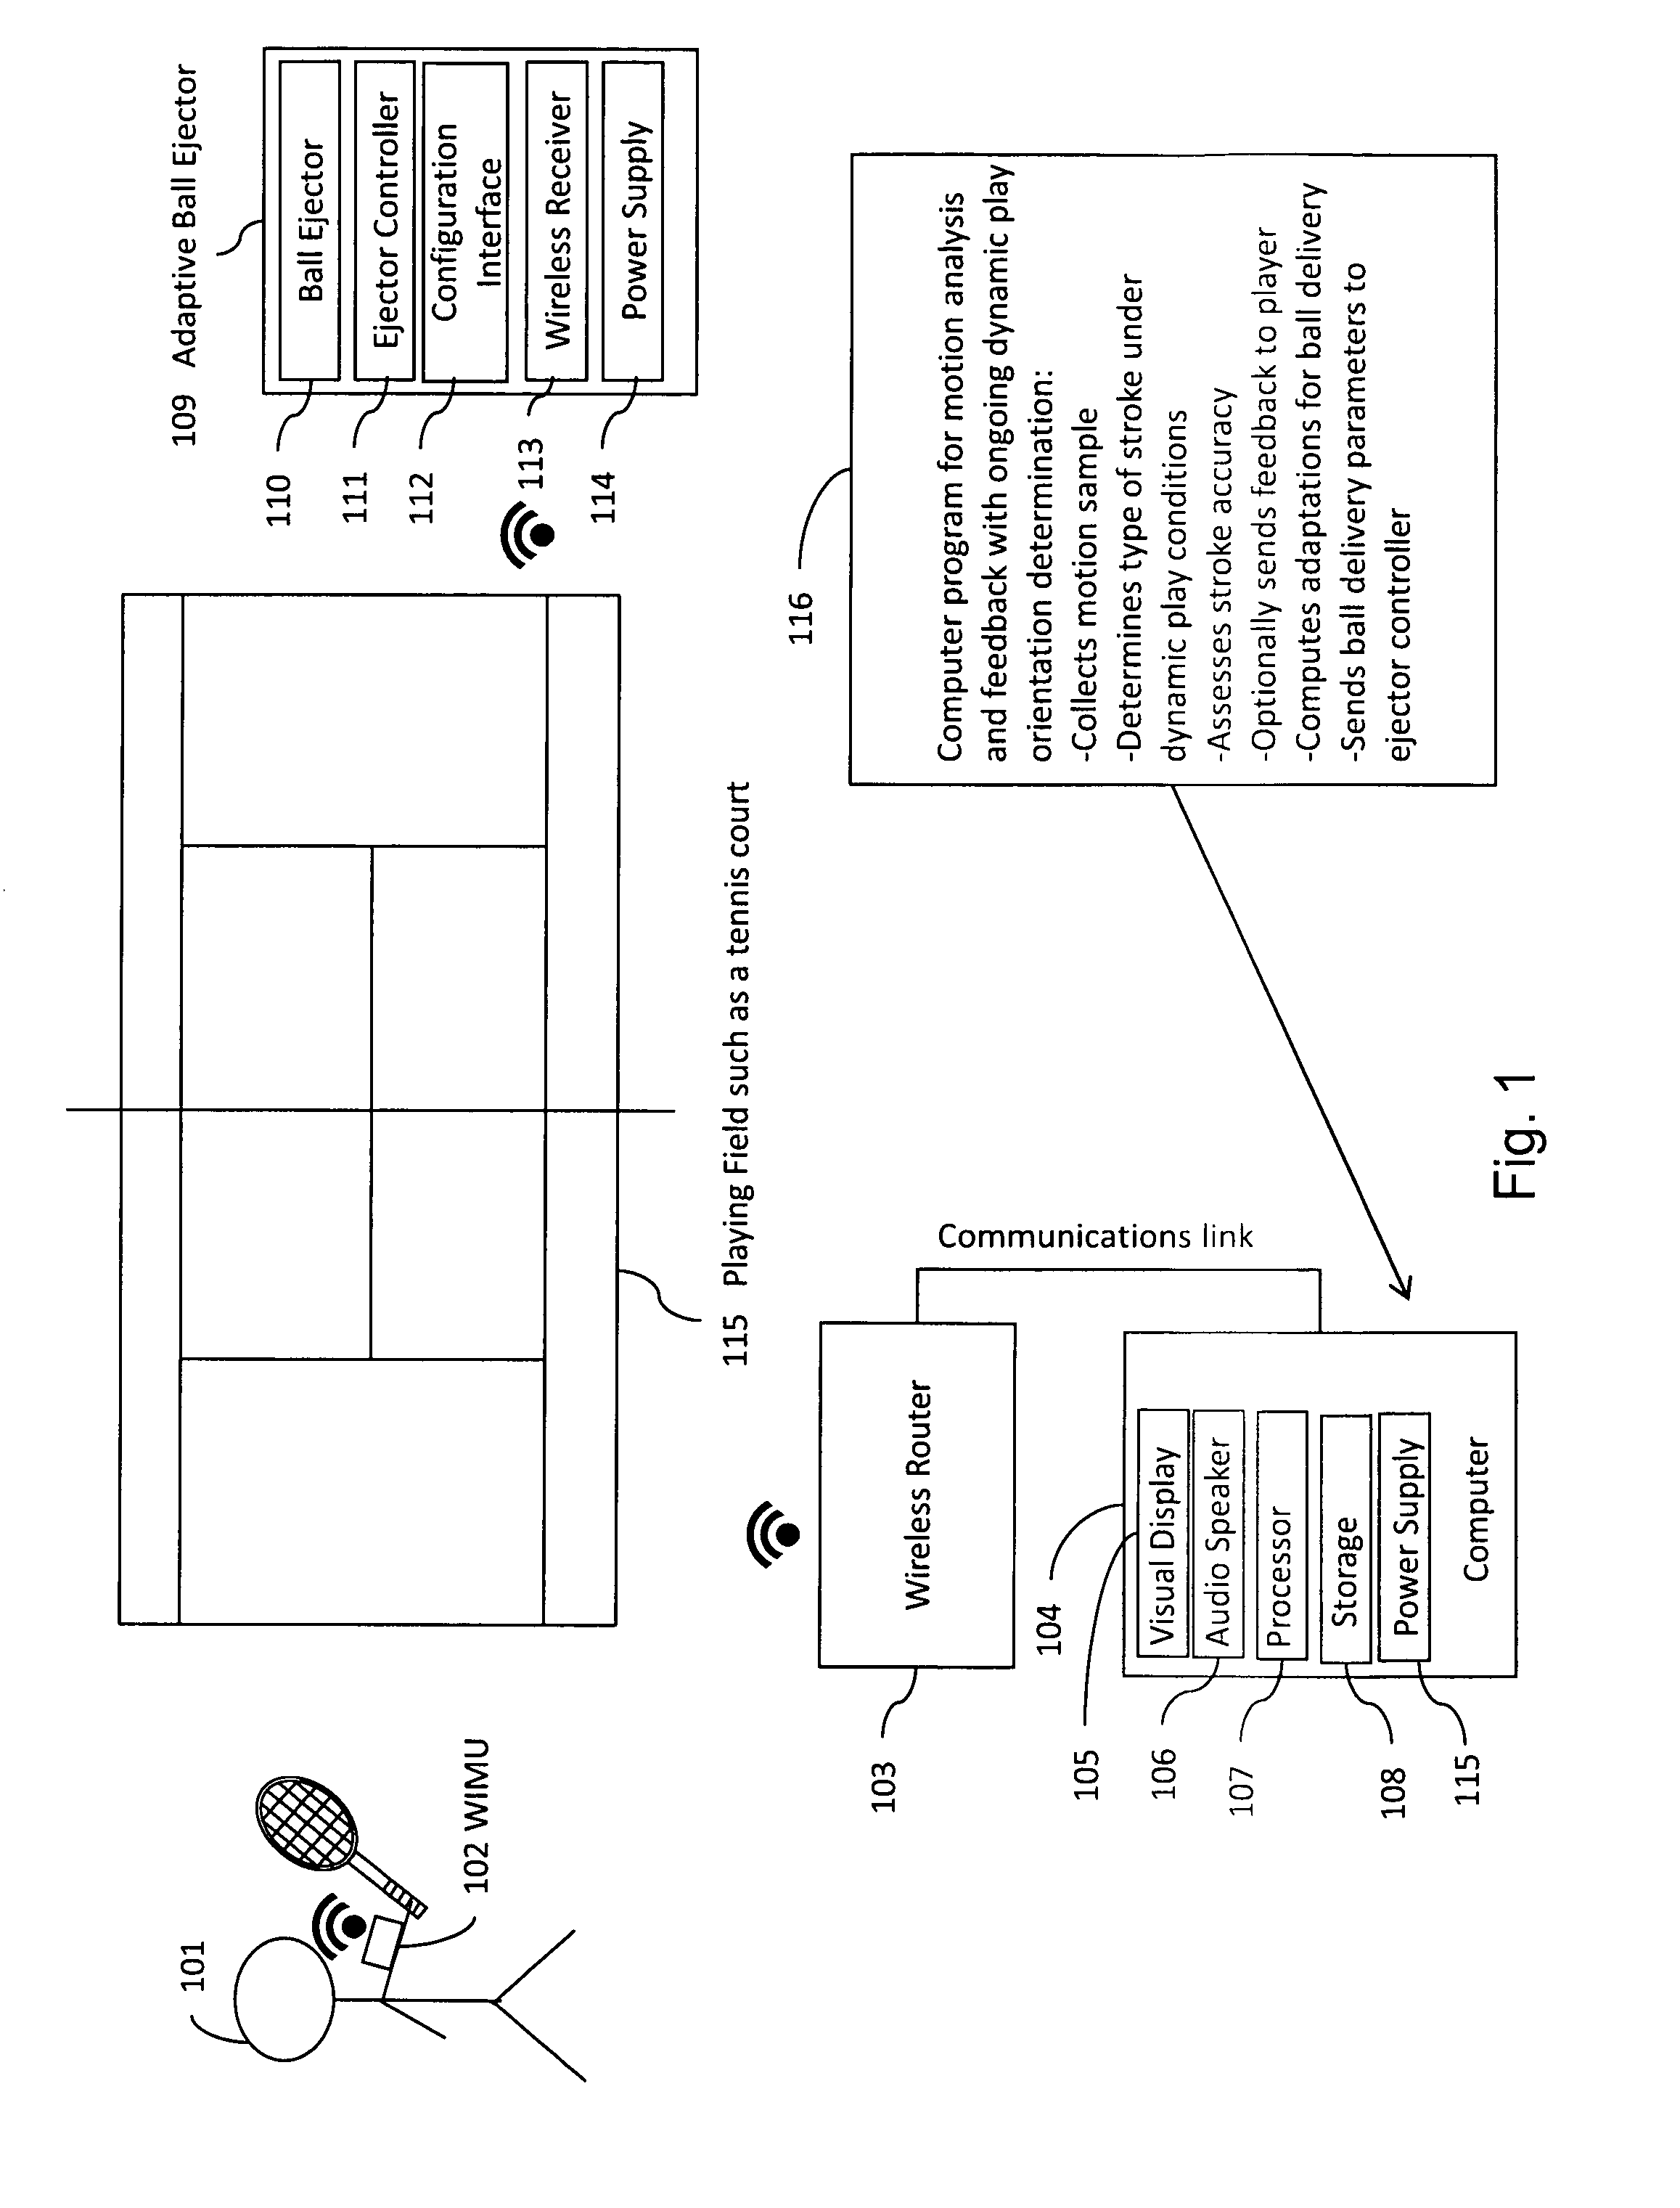 System and method for adaptive delivery of game balls based on player-specific performance data analysis